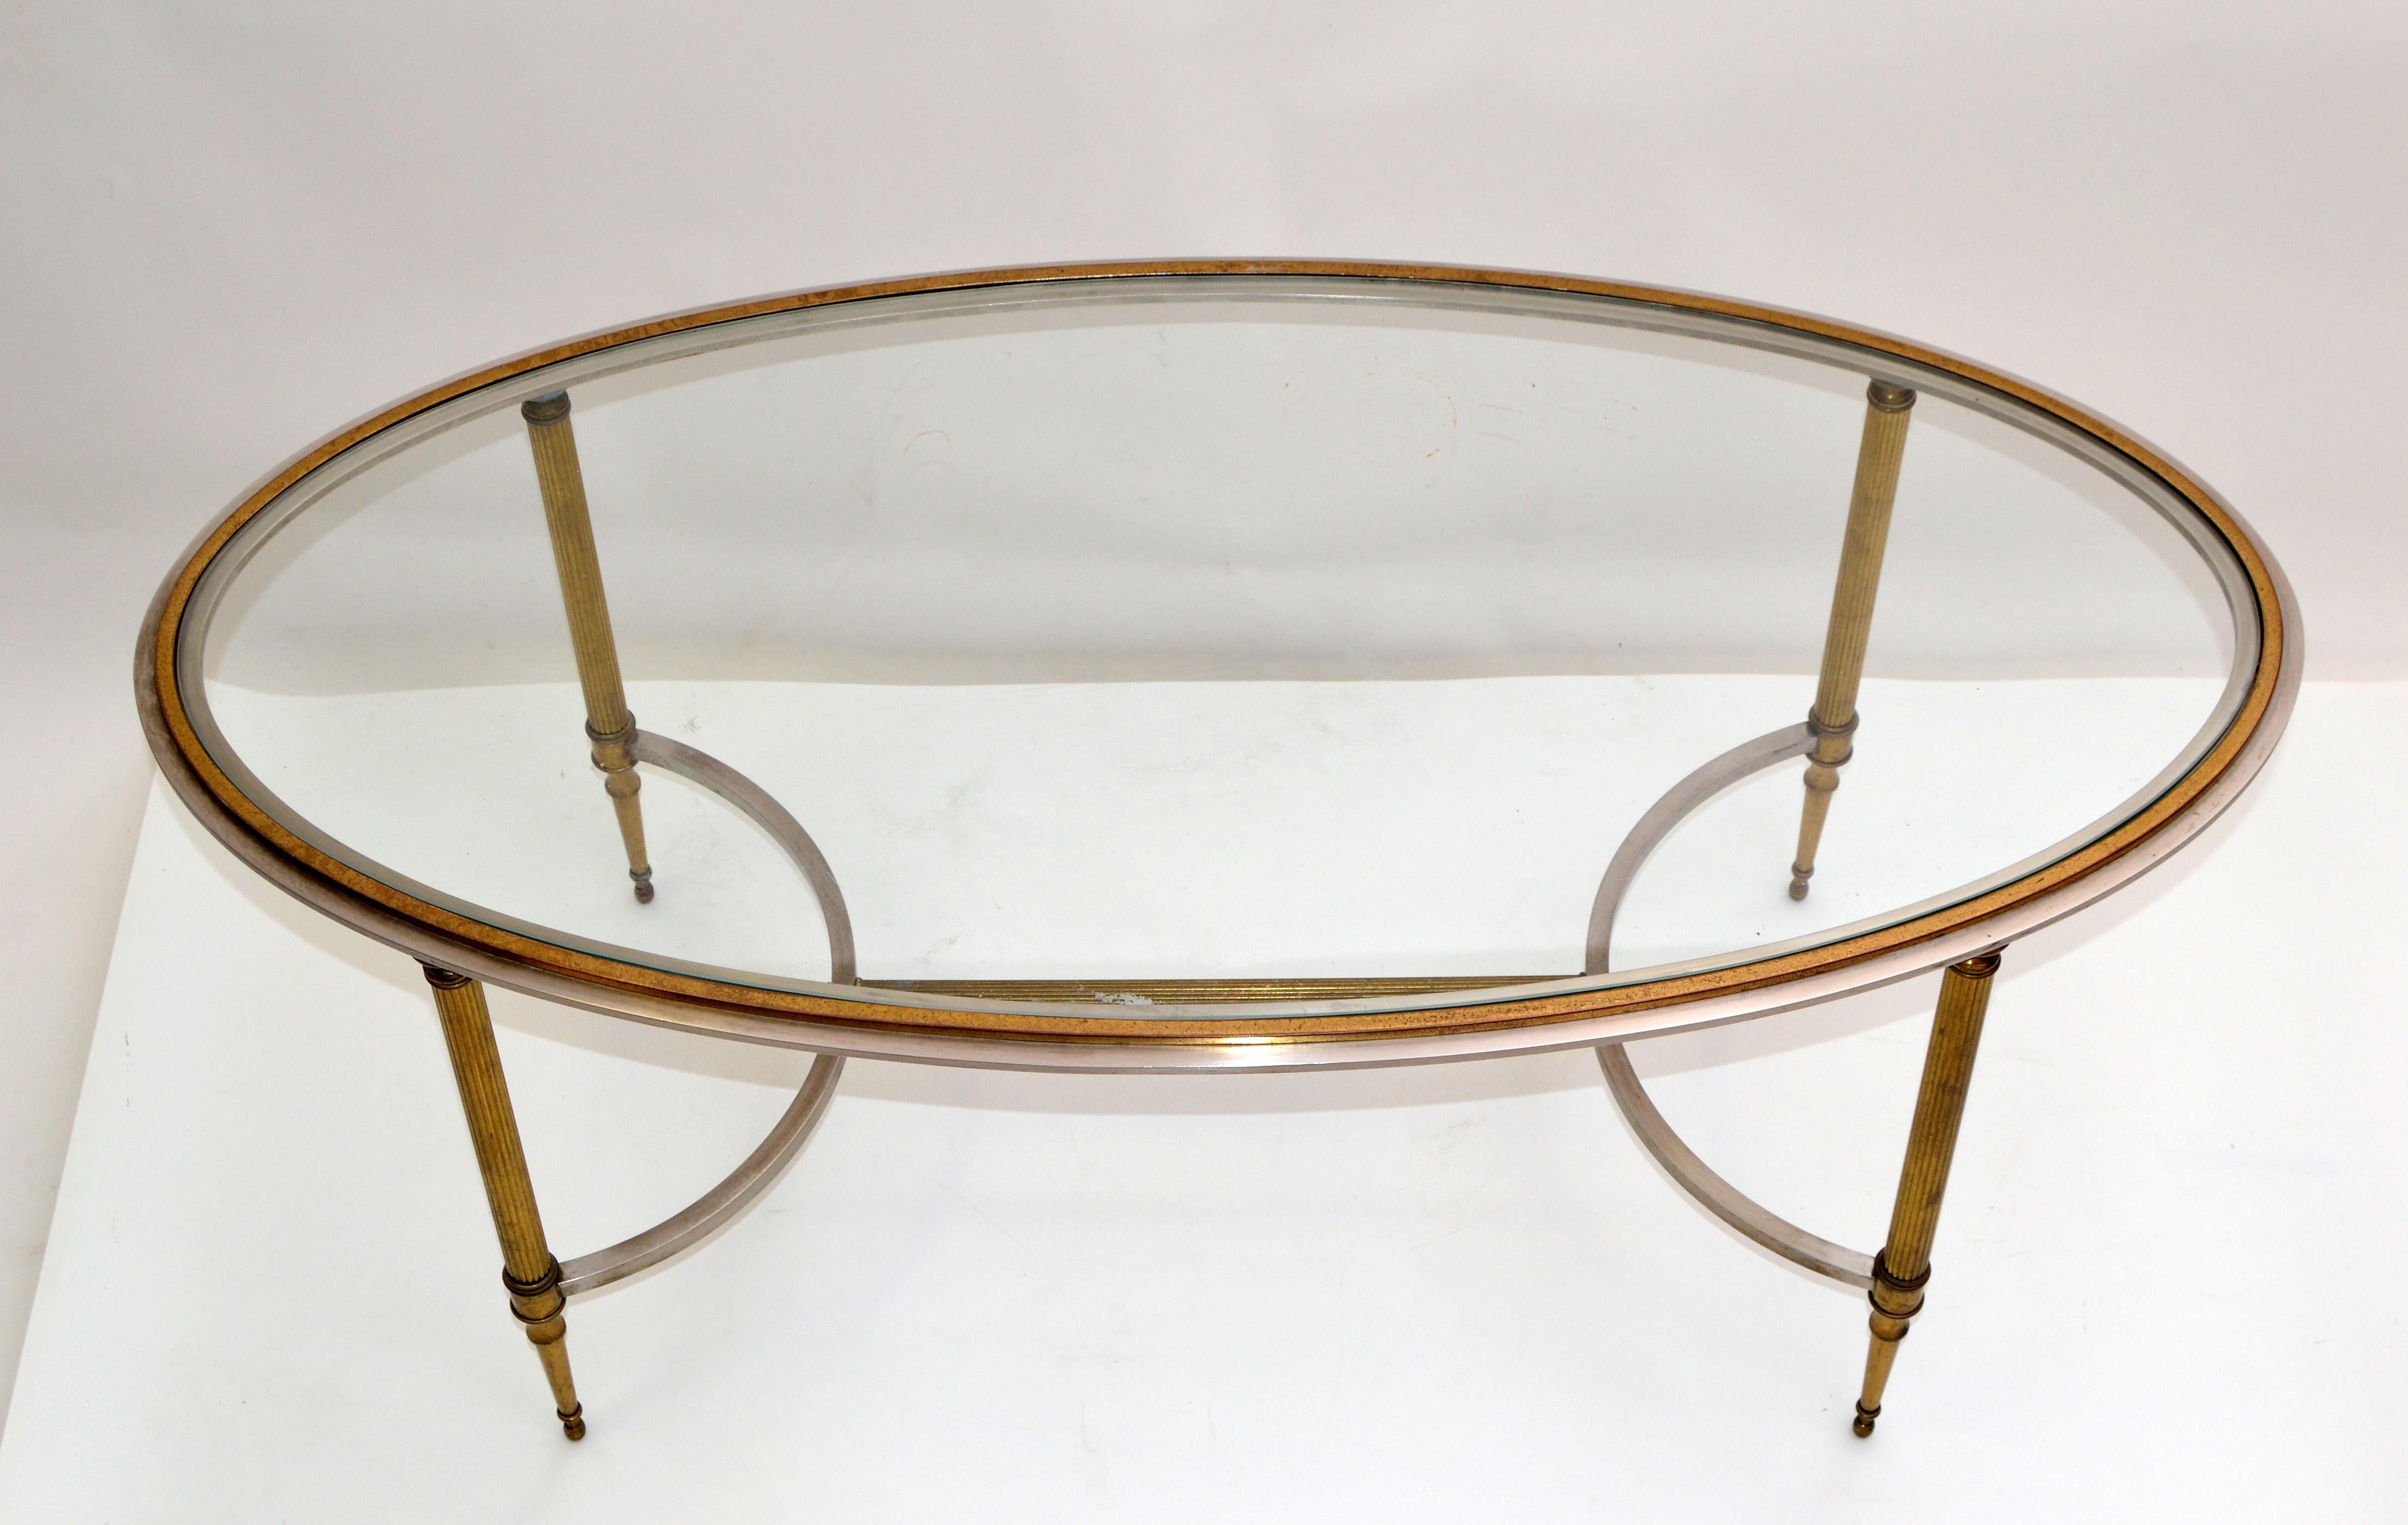 Mid-20th Century French Maison Jansen Oval Glass, Brass & Steel Coffee Table Neoclassical, 1960s